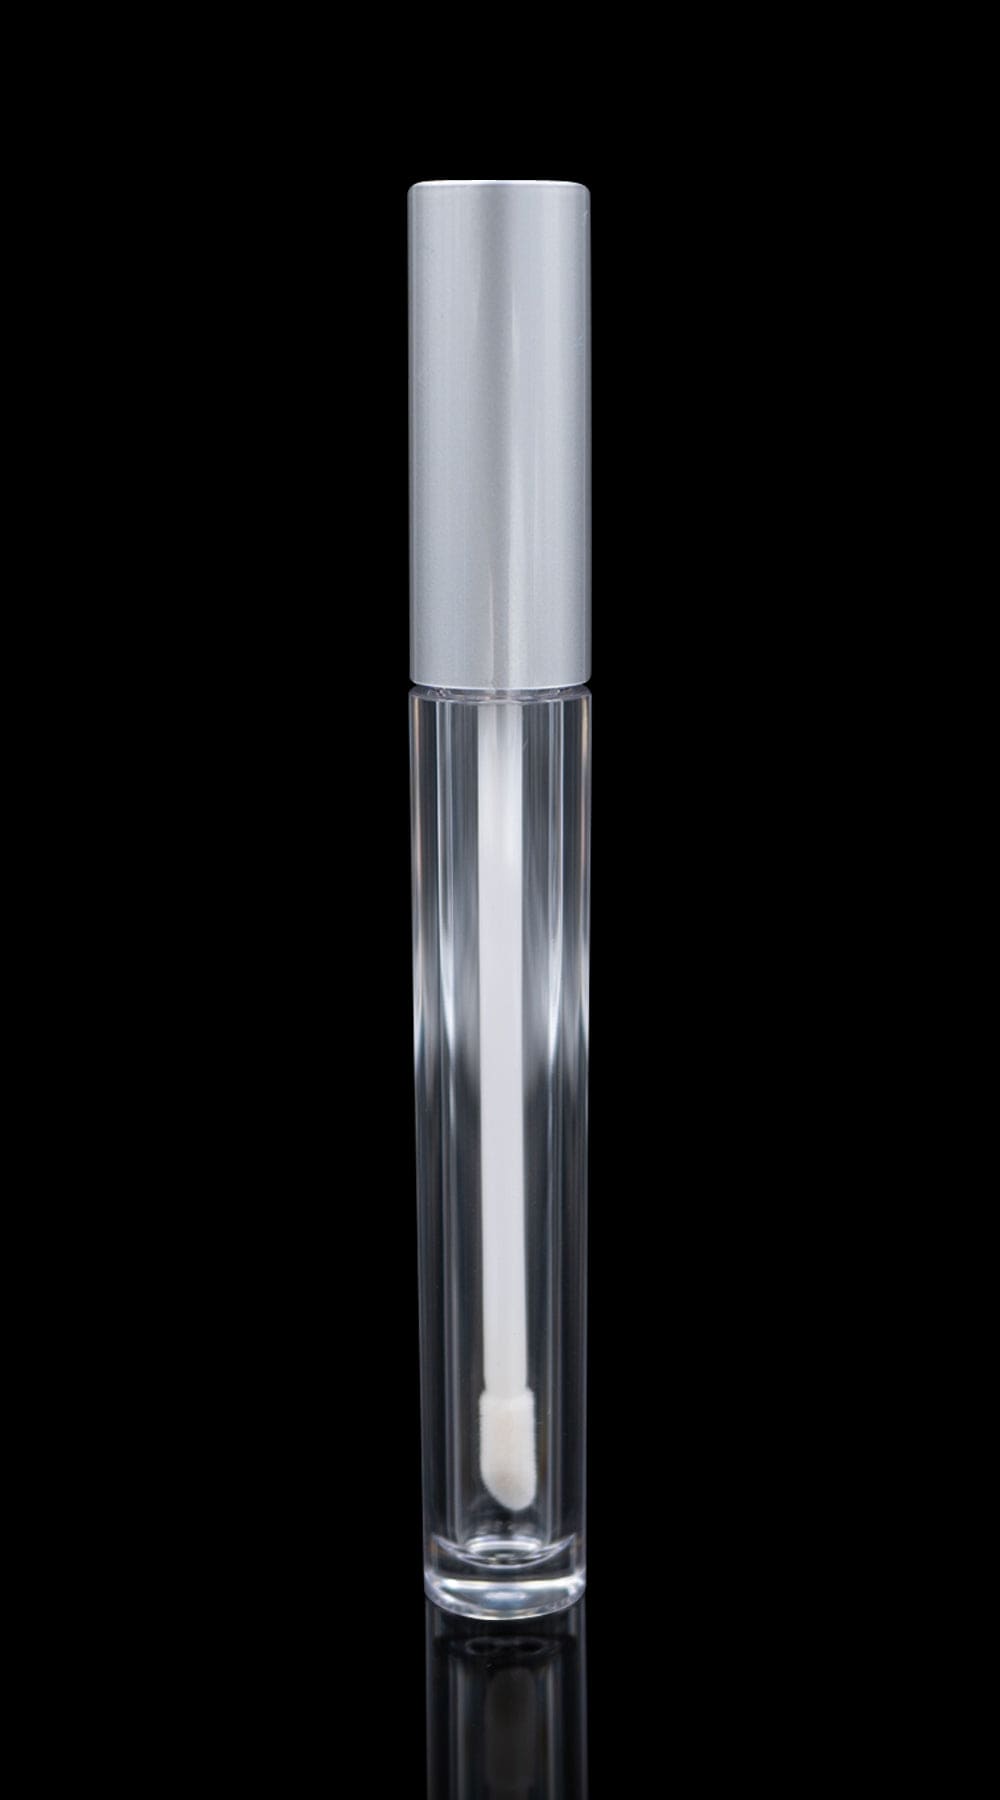 Vibe Lip Gloss Container Matte Silver Cap with Clear Bottle - Cosmetic Packaging Now